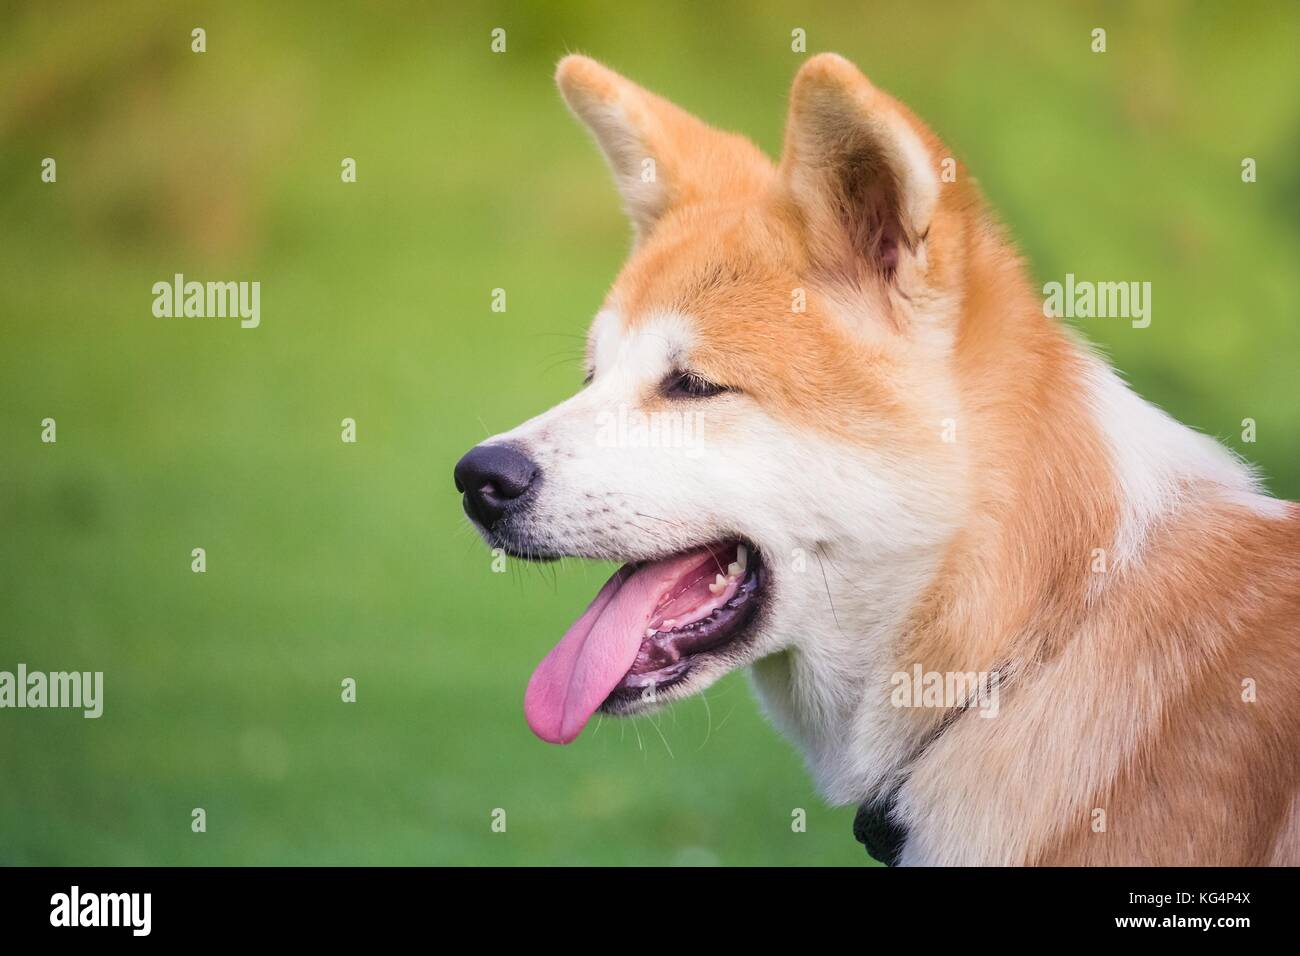 the portrait of a little puppy akita inu on a soft background of green color Stock Photo